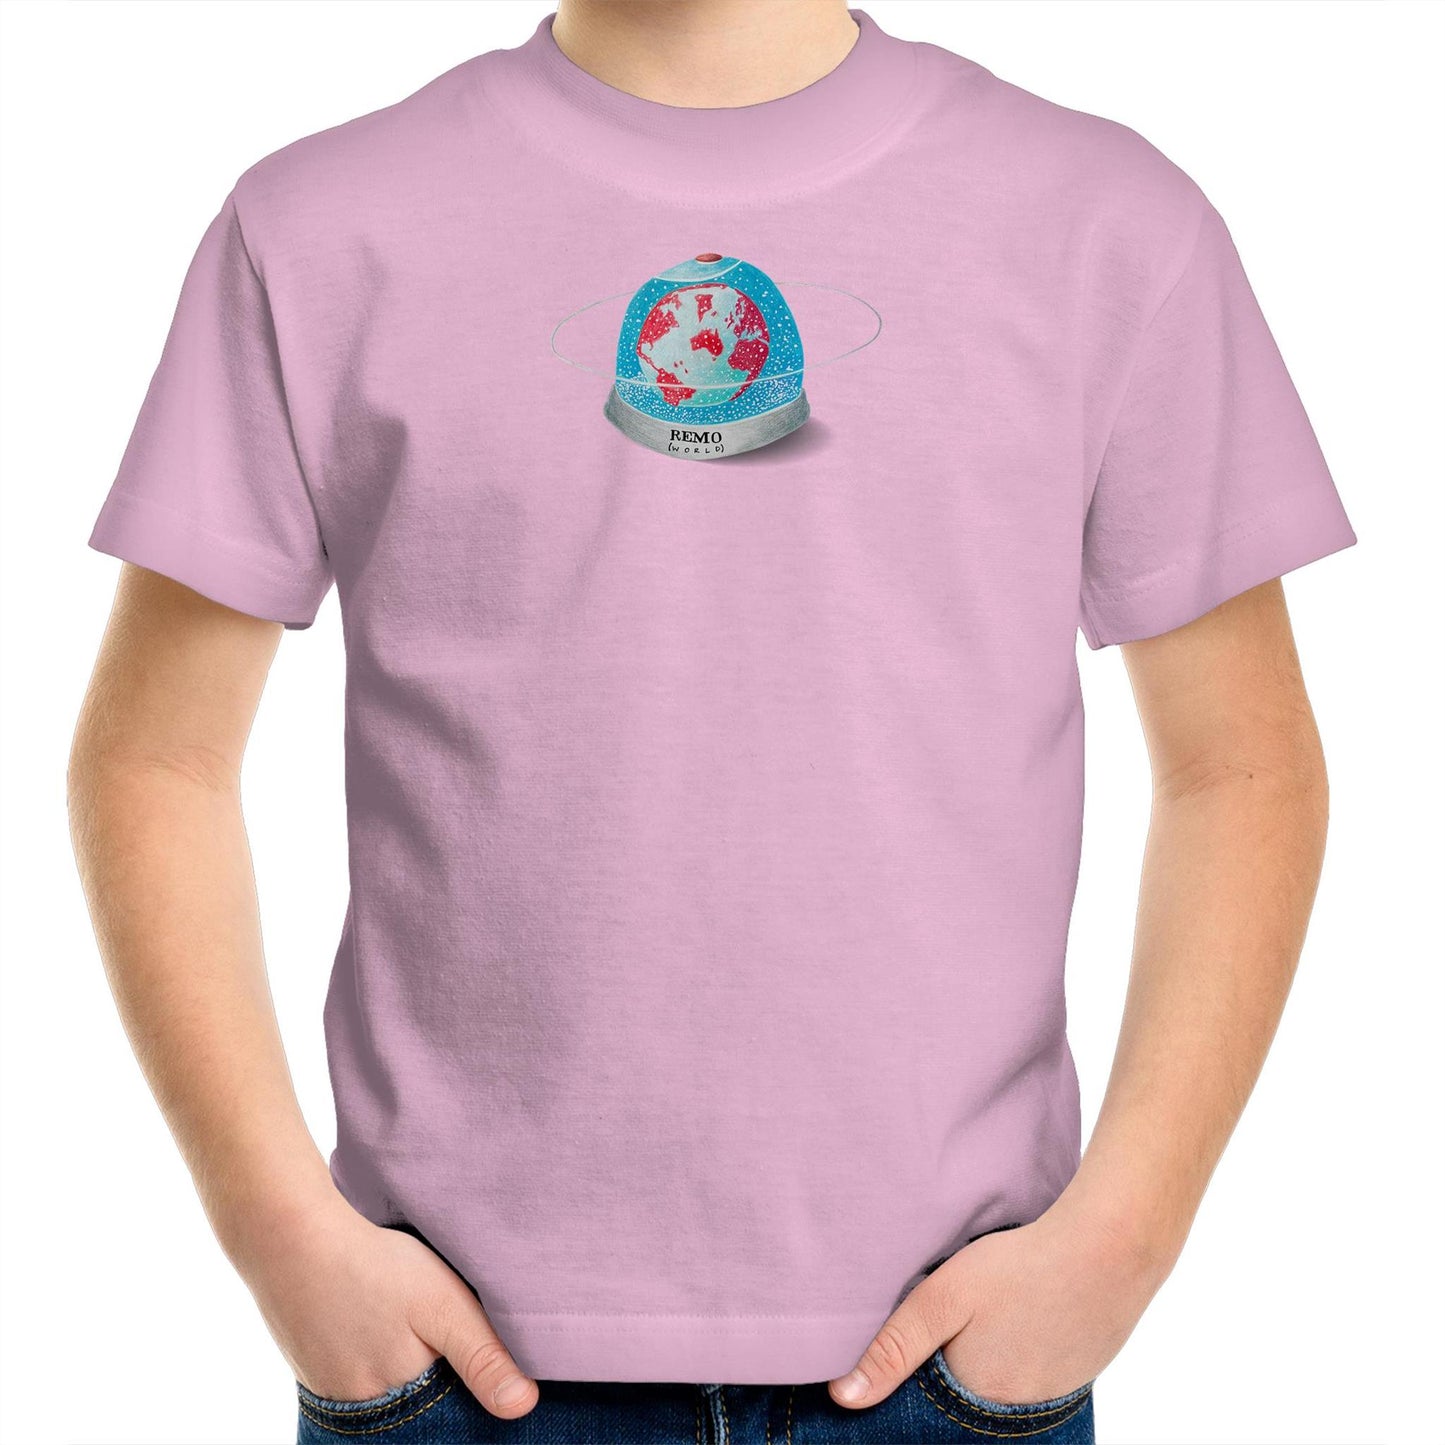 REMO World T Shirts for Kids